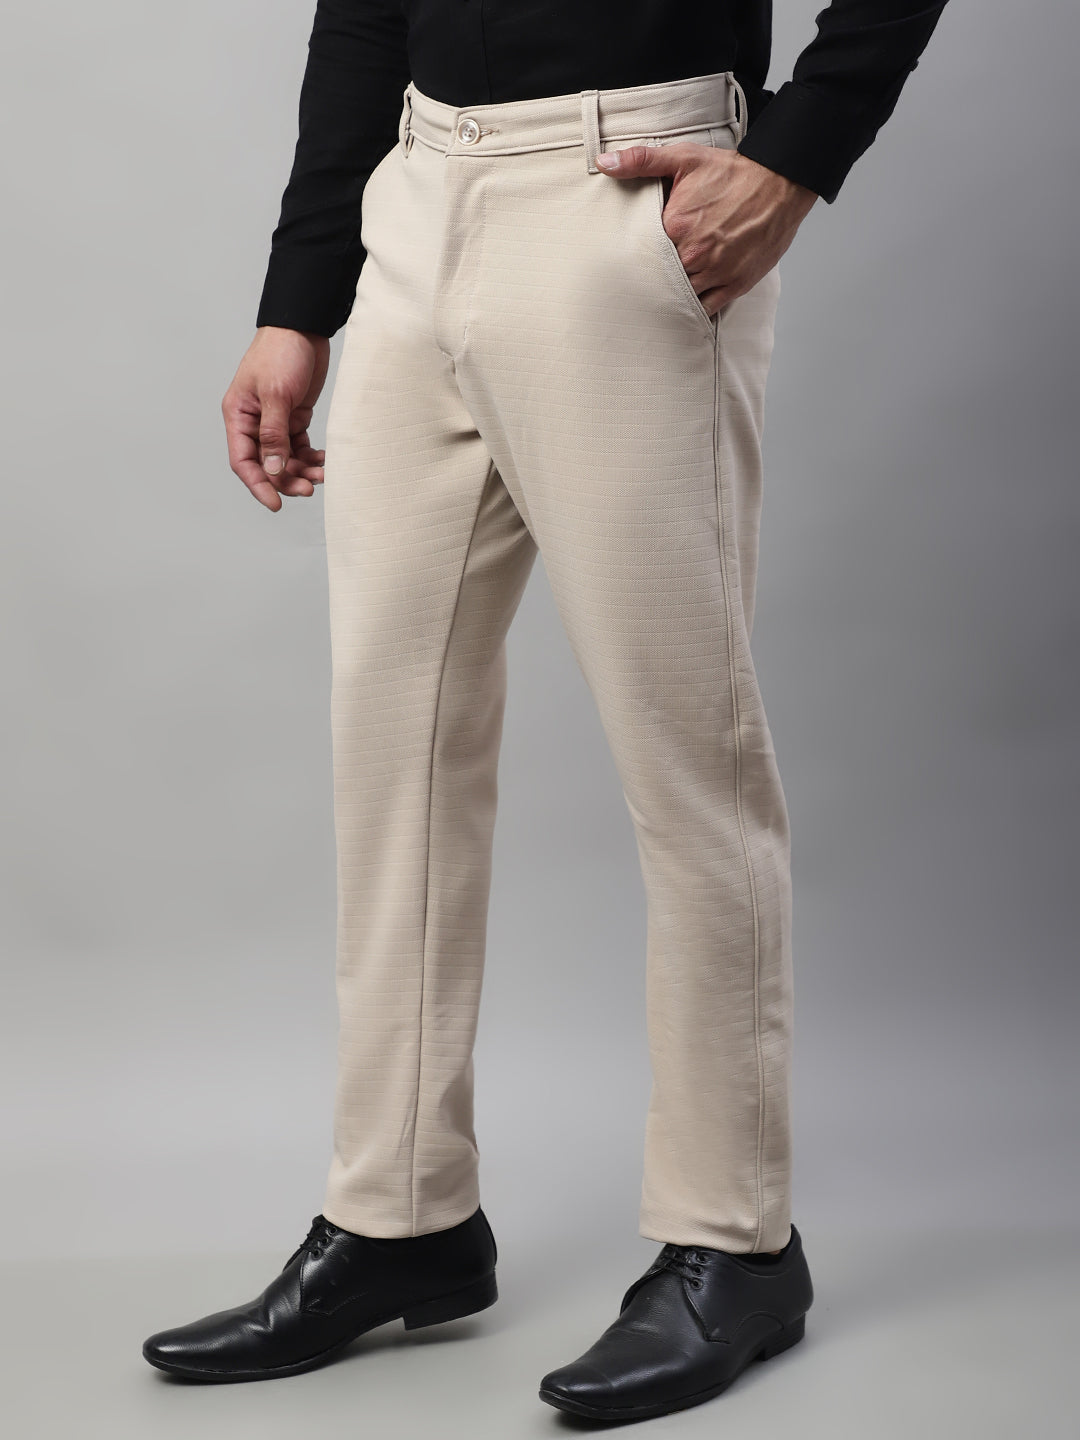 Arrow Formal Trousers  Buy Arrow Men Grey Tapered Fit Viscose Stretch  Patterned Formal Trousers Online  Nykaa Fashion